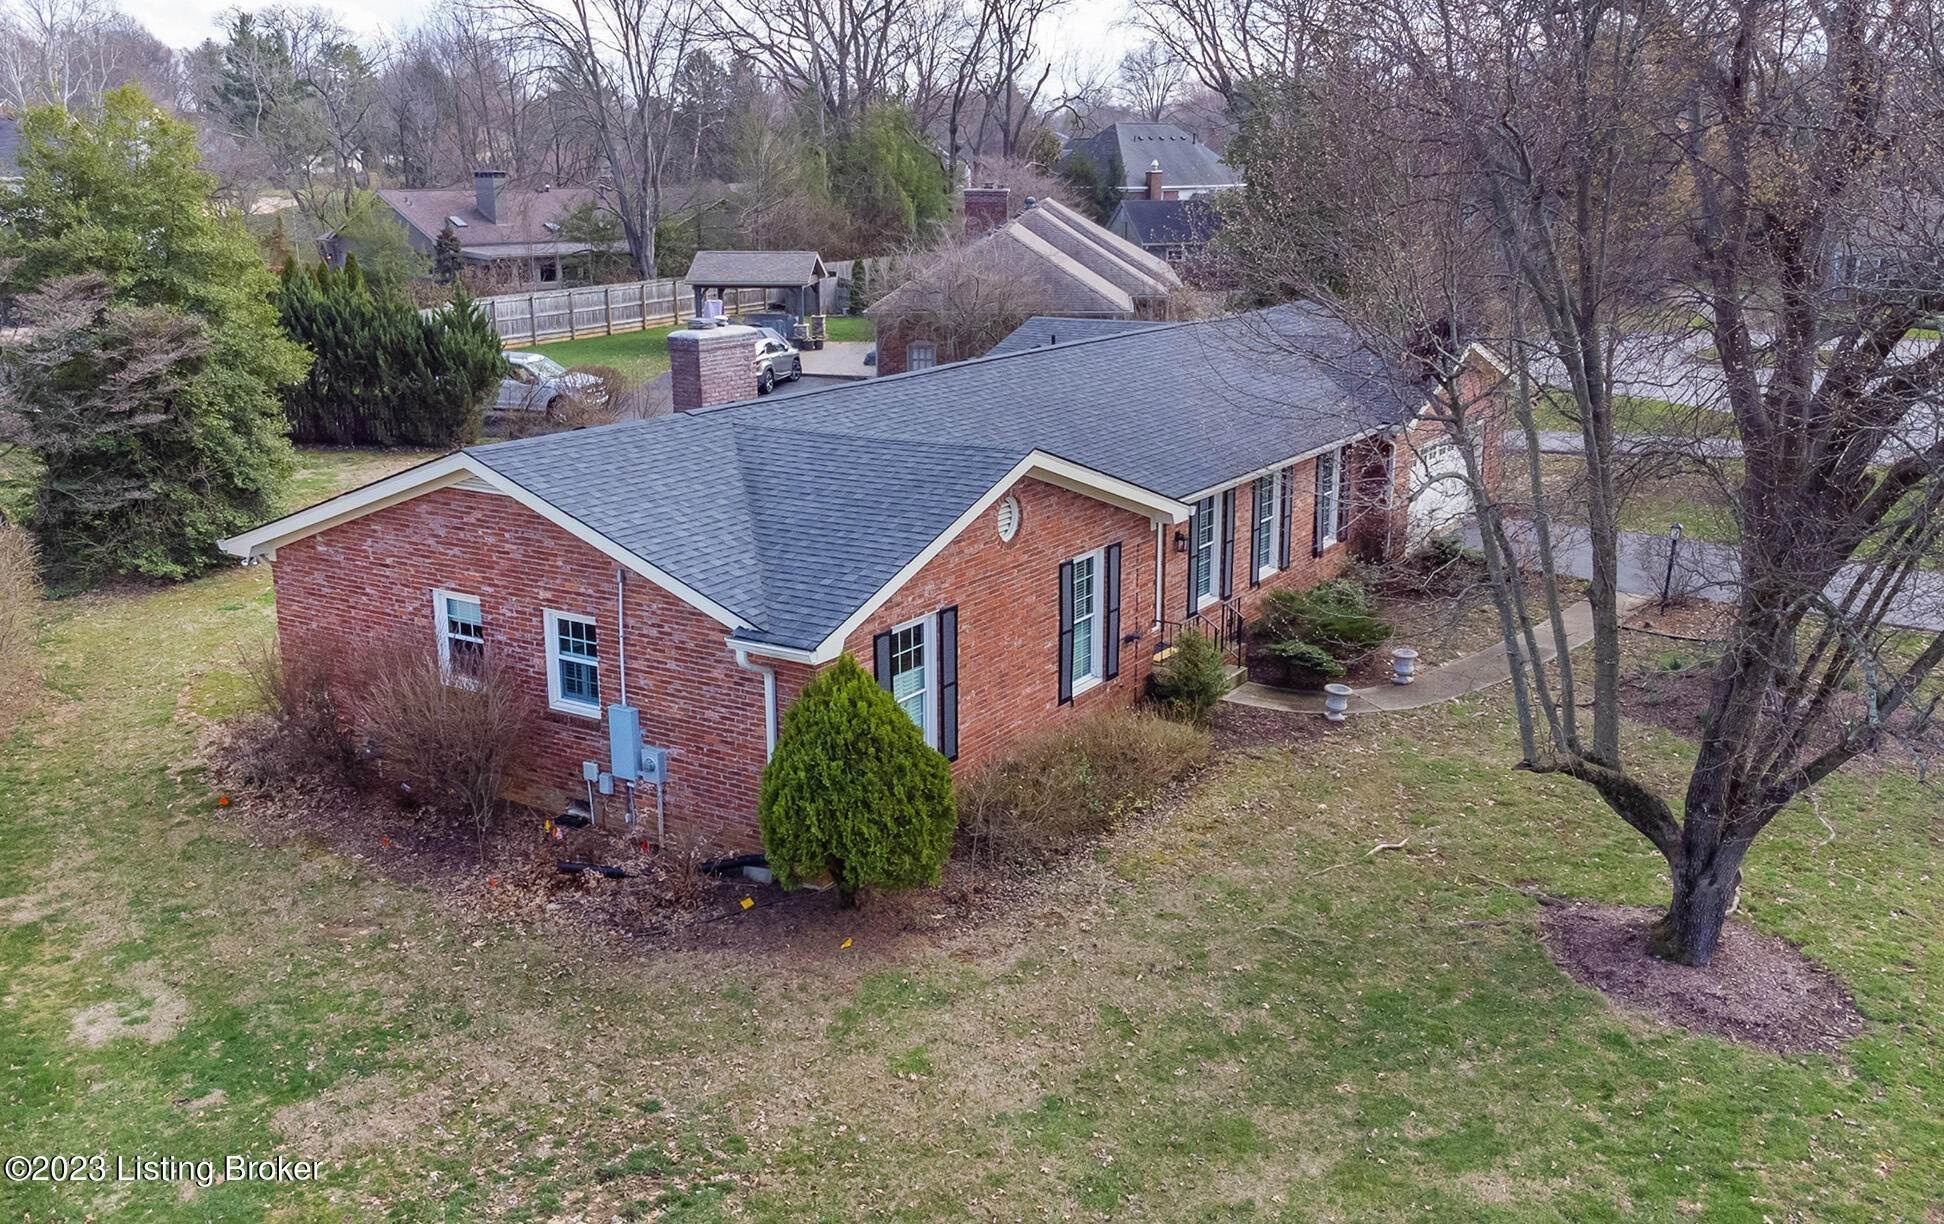 44. Single Family at Louisville, KY 40222